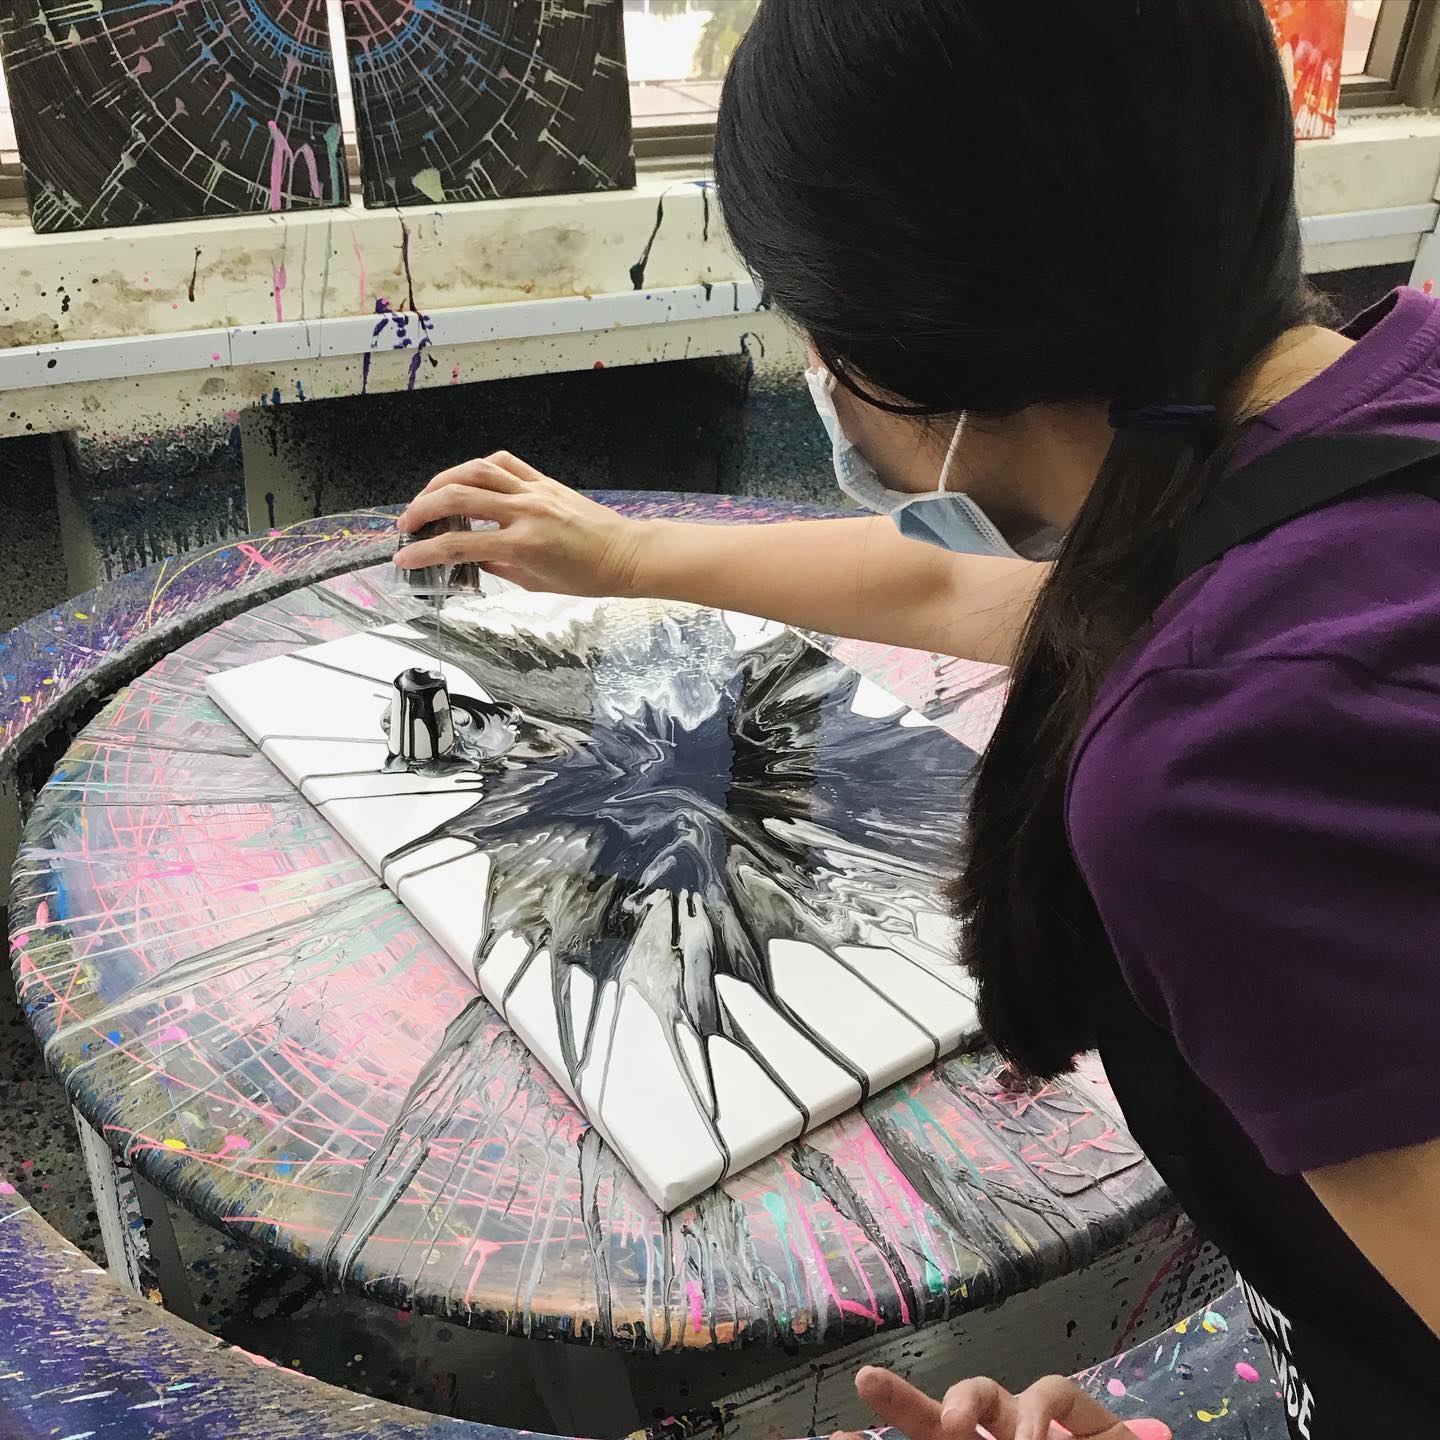 Express Yourself Through Iconic Spin Art At This Cool Paint Studio - Secret  Singapore